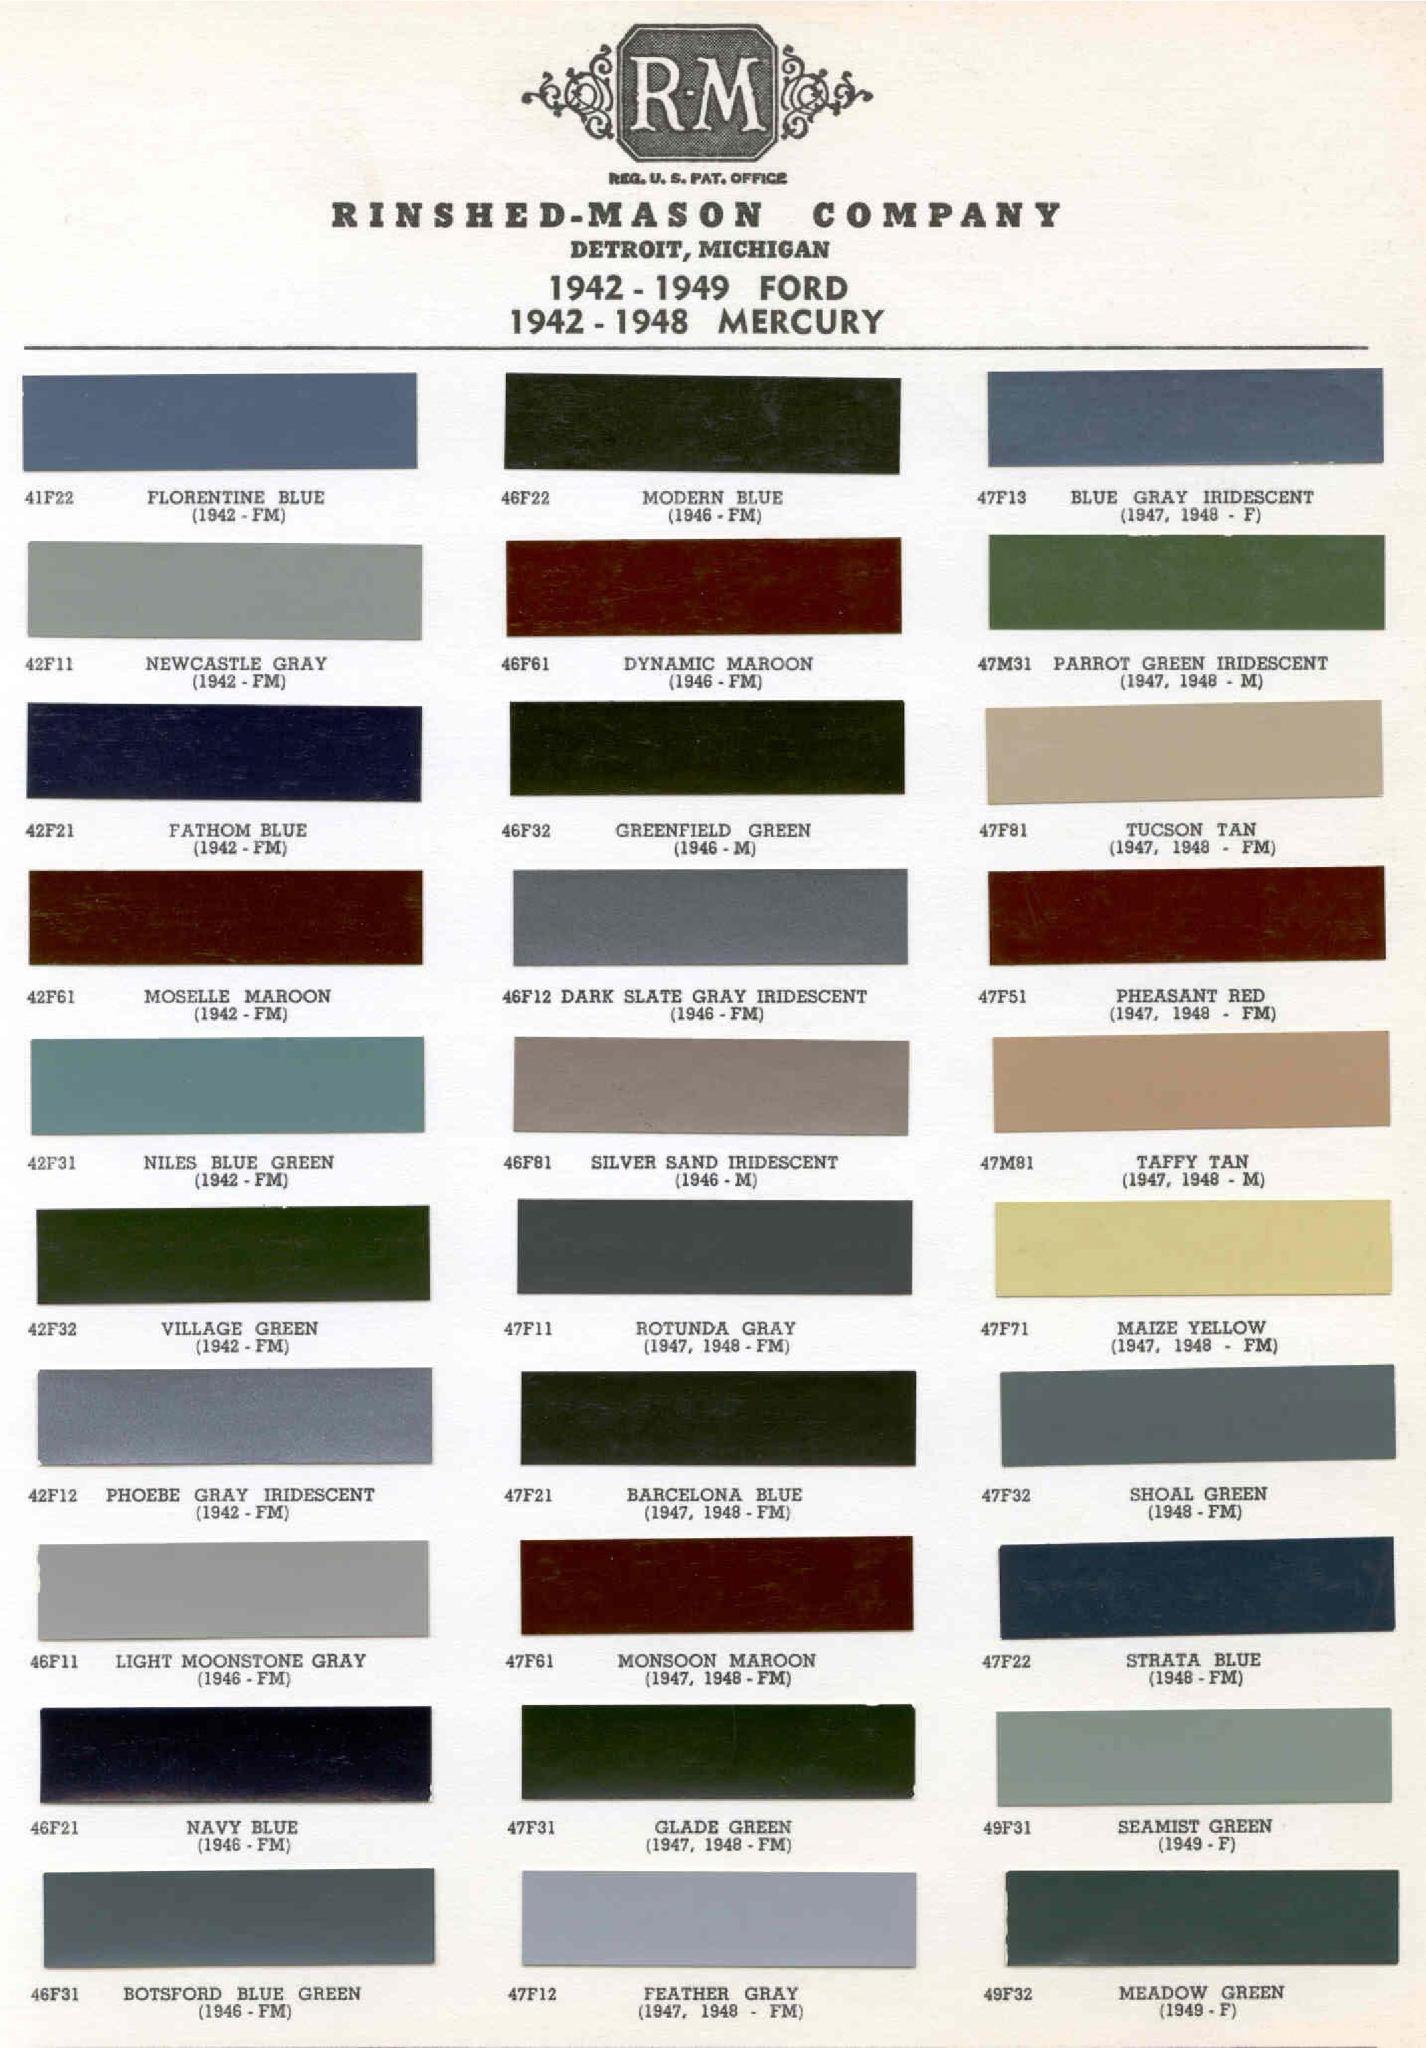 Exterior Colors and Used on Mercury in 1947